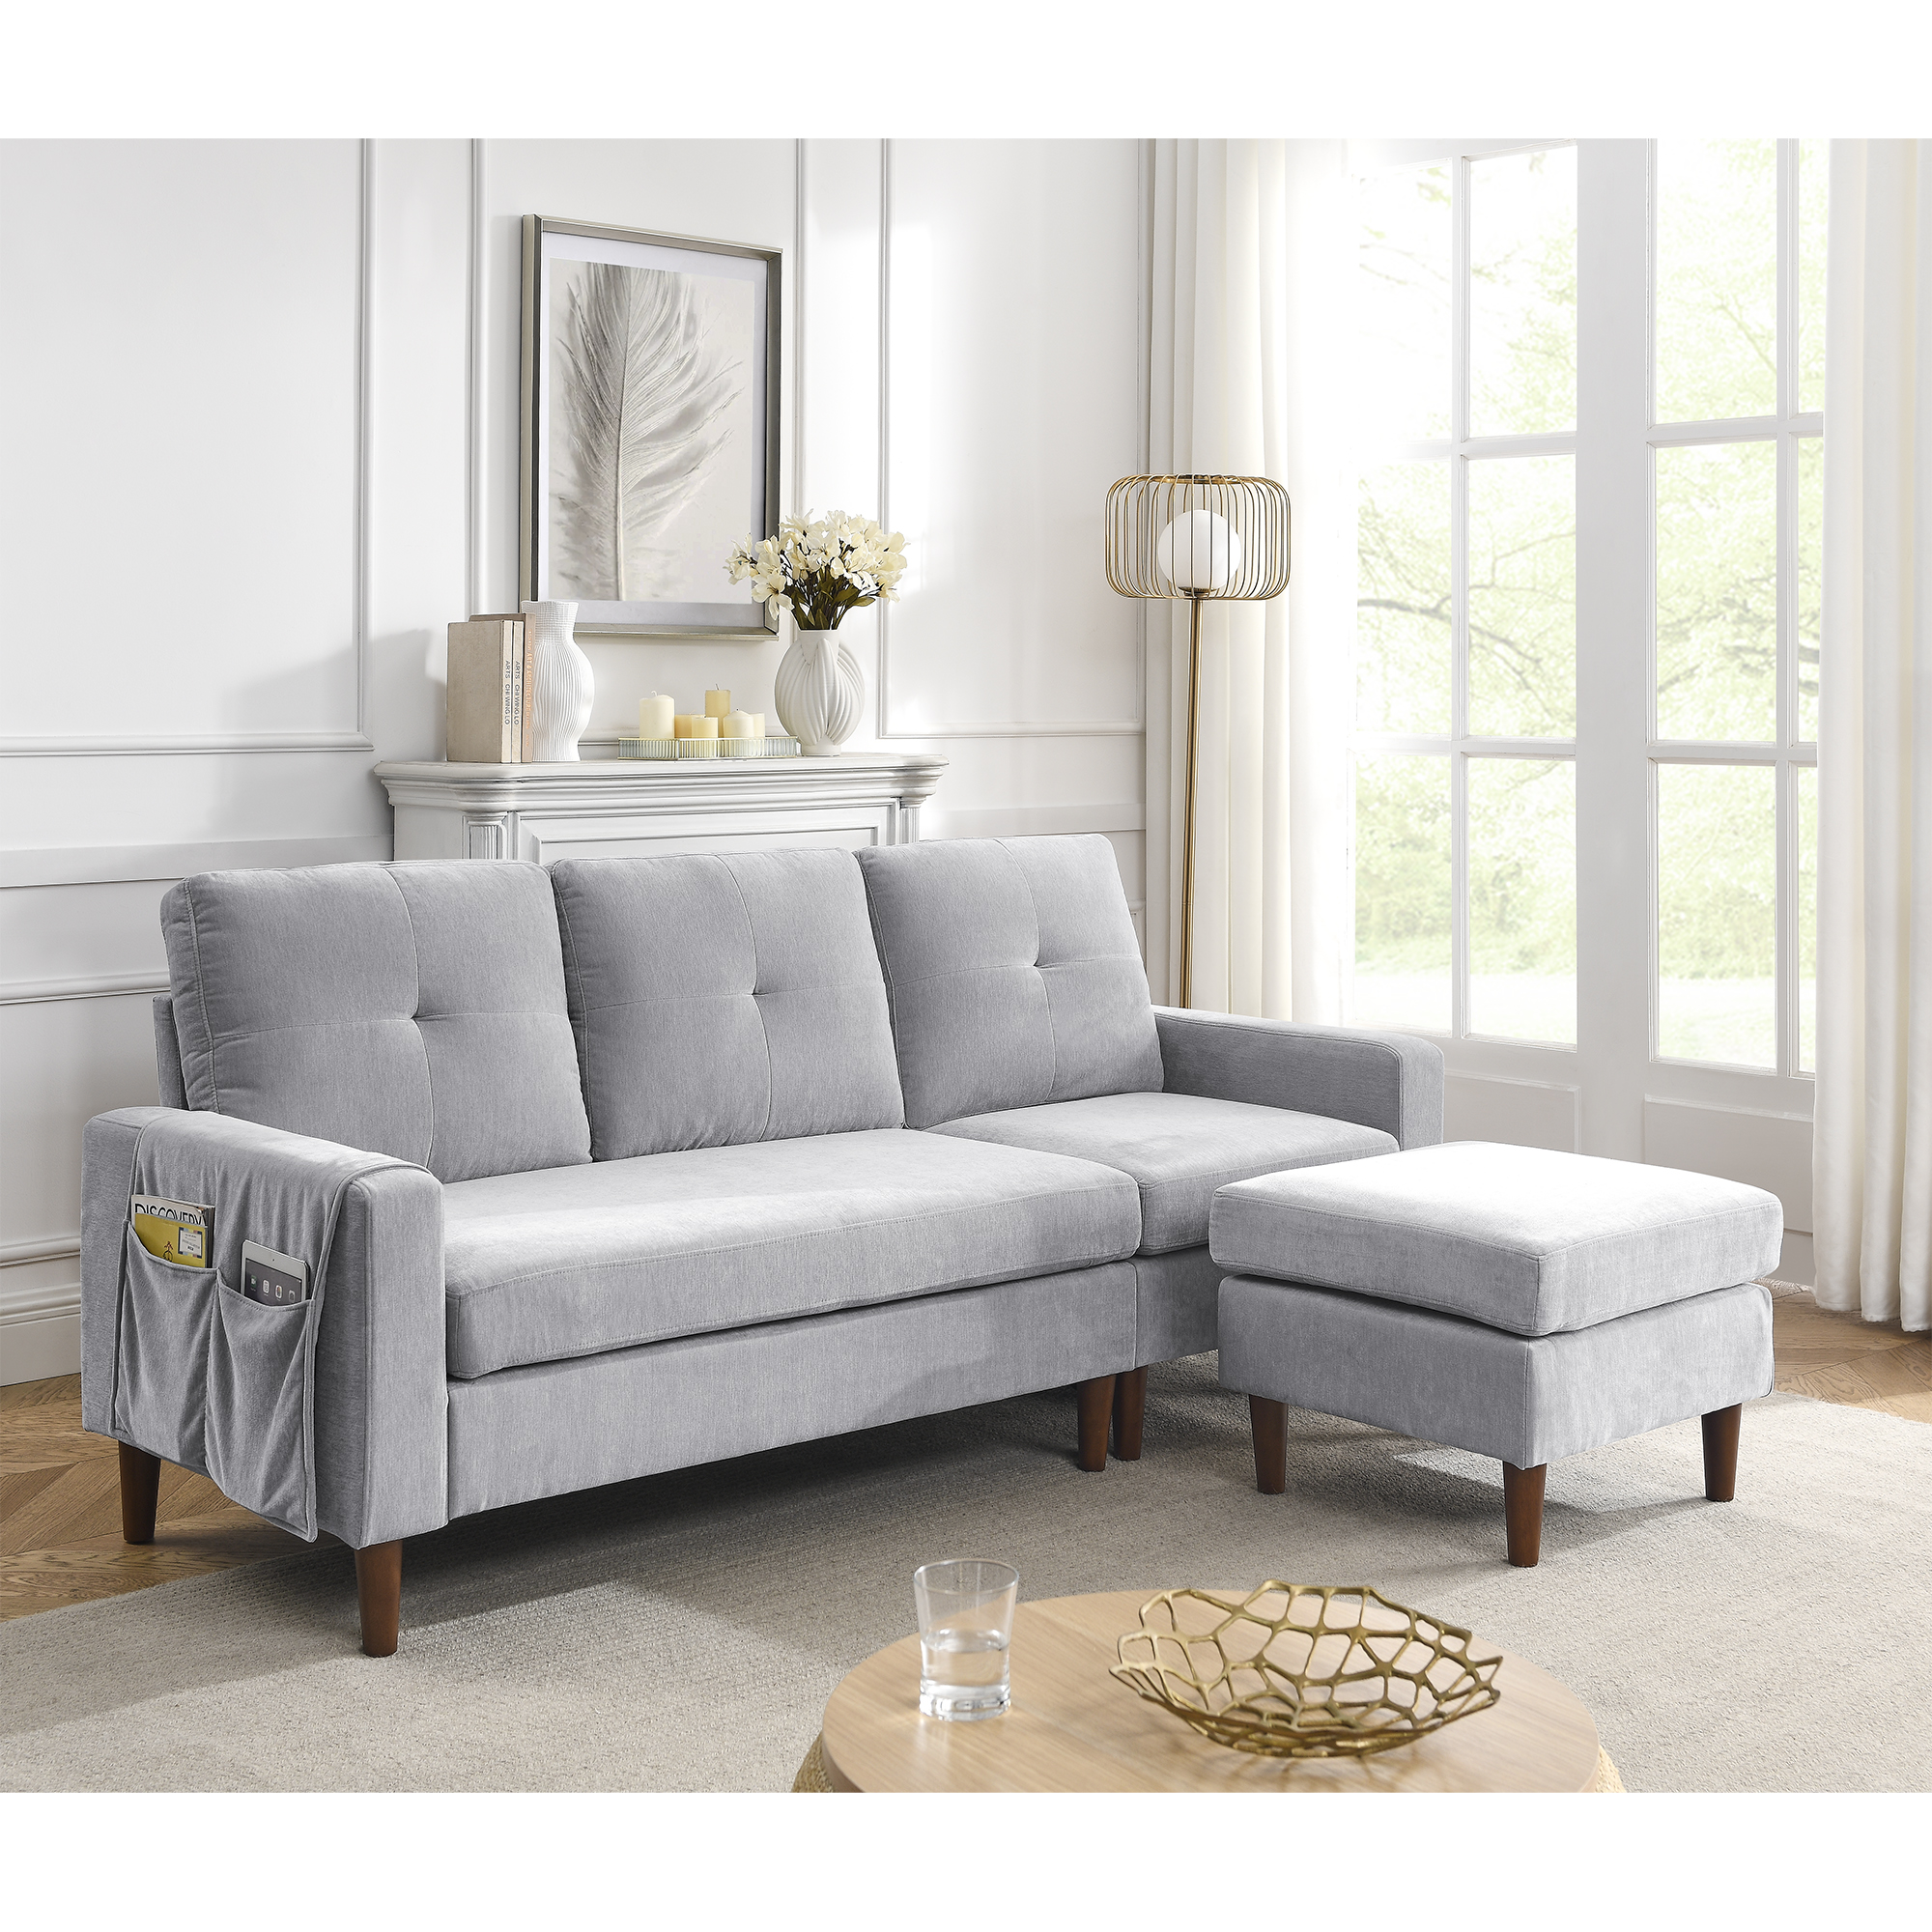 80” Convertible Sectional Sofa Couch, 3 Seats L-shape Sofa with Removable Cushions and Pocket, Rubber Wood Legs, Light Grey Chenille-CASAINC